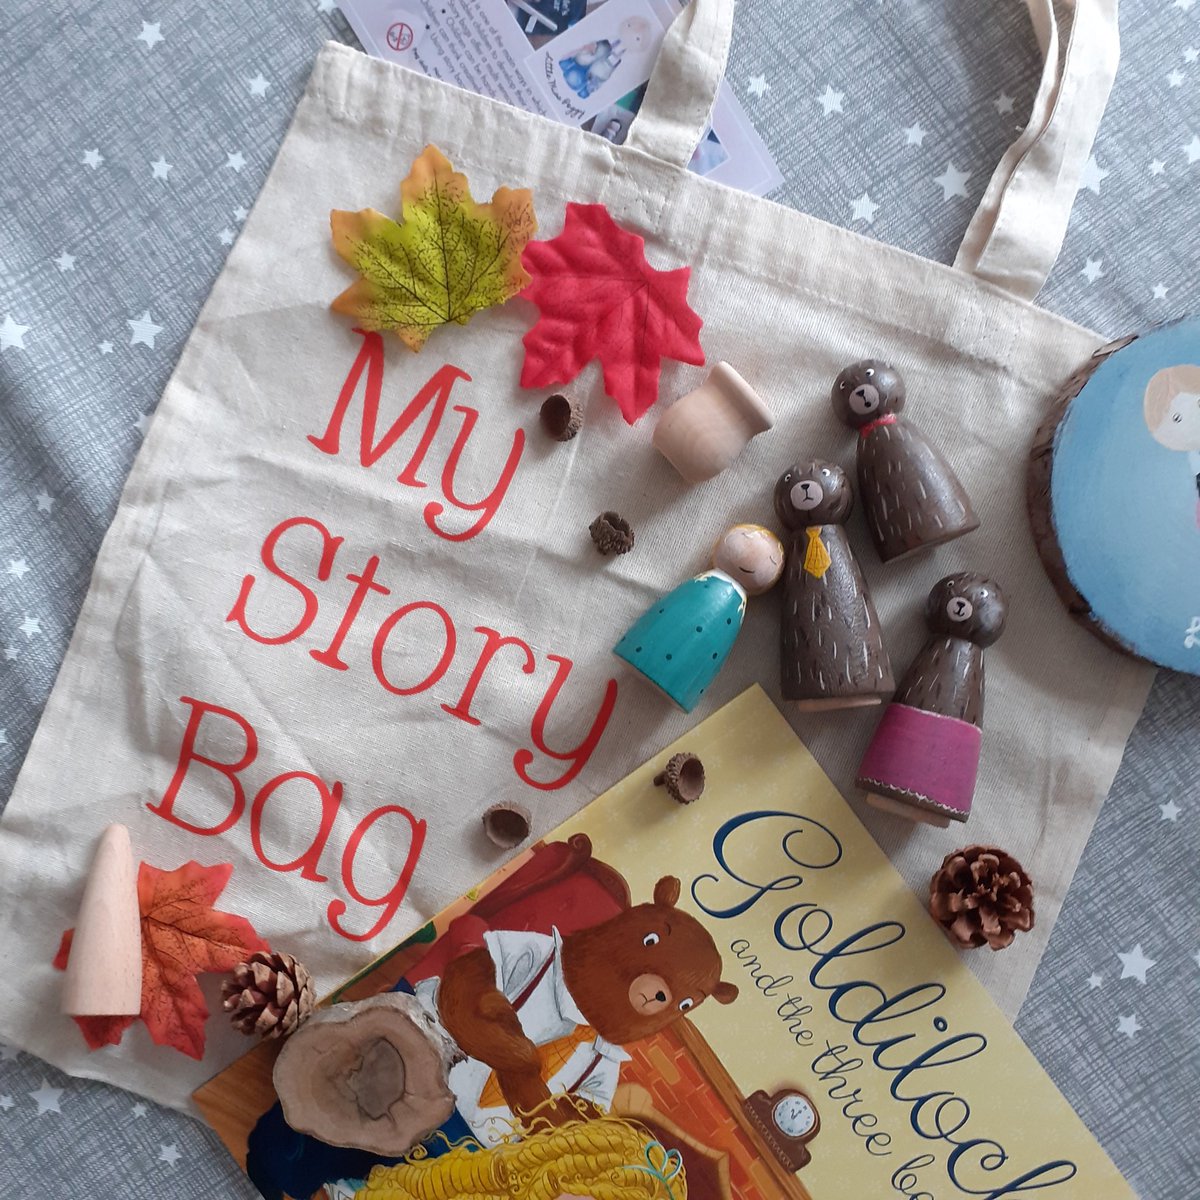 #backtoschool today for us! Learning never stop stops though #learningthroughplay 
This is a great story bag for use at home and school #giftforkids #teachergift 
Do you like Goldilocks? #earlybiz #buyindie #etsy #UKCraftersHour  #shopsmall #buysmall